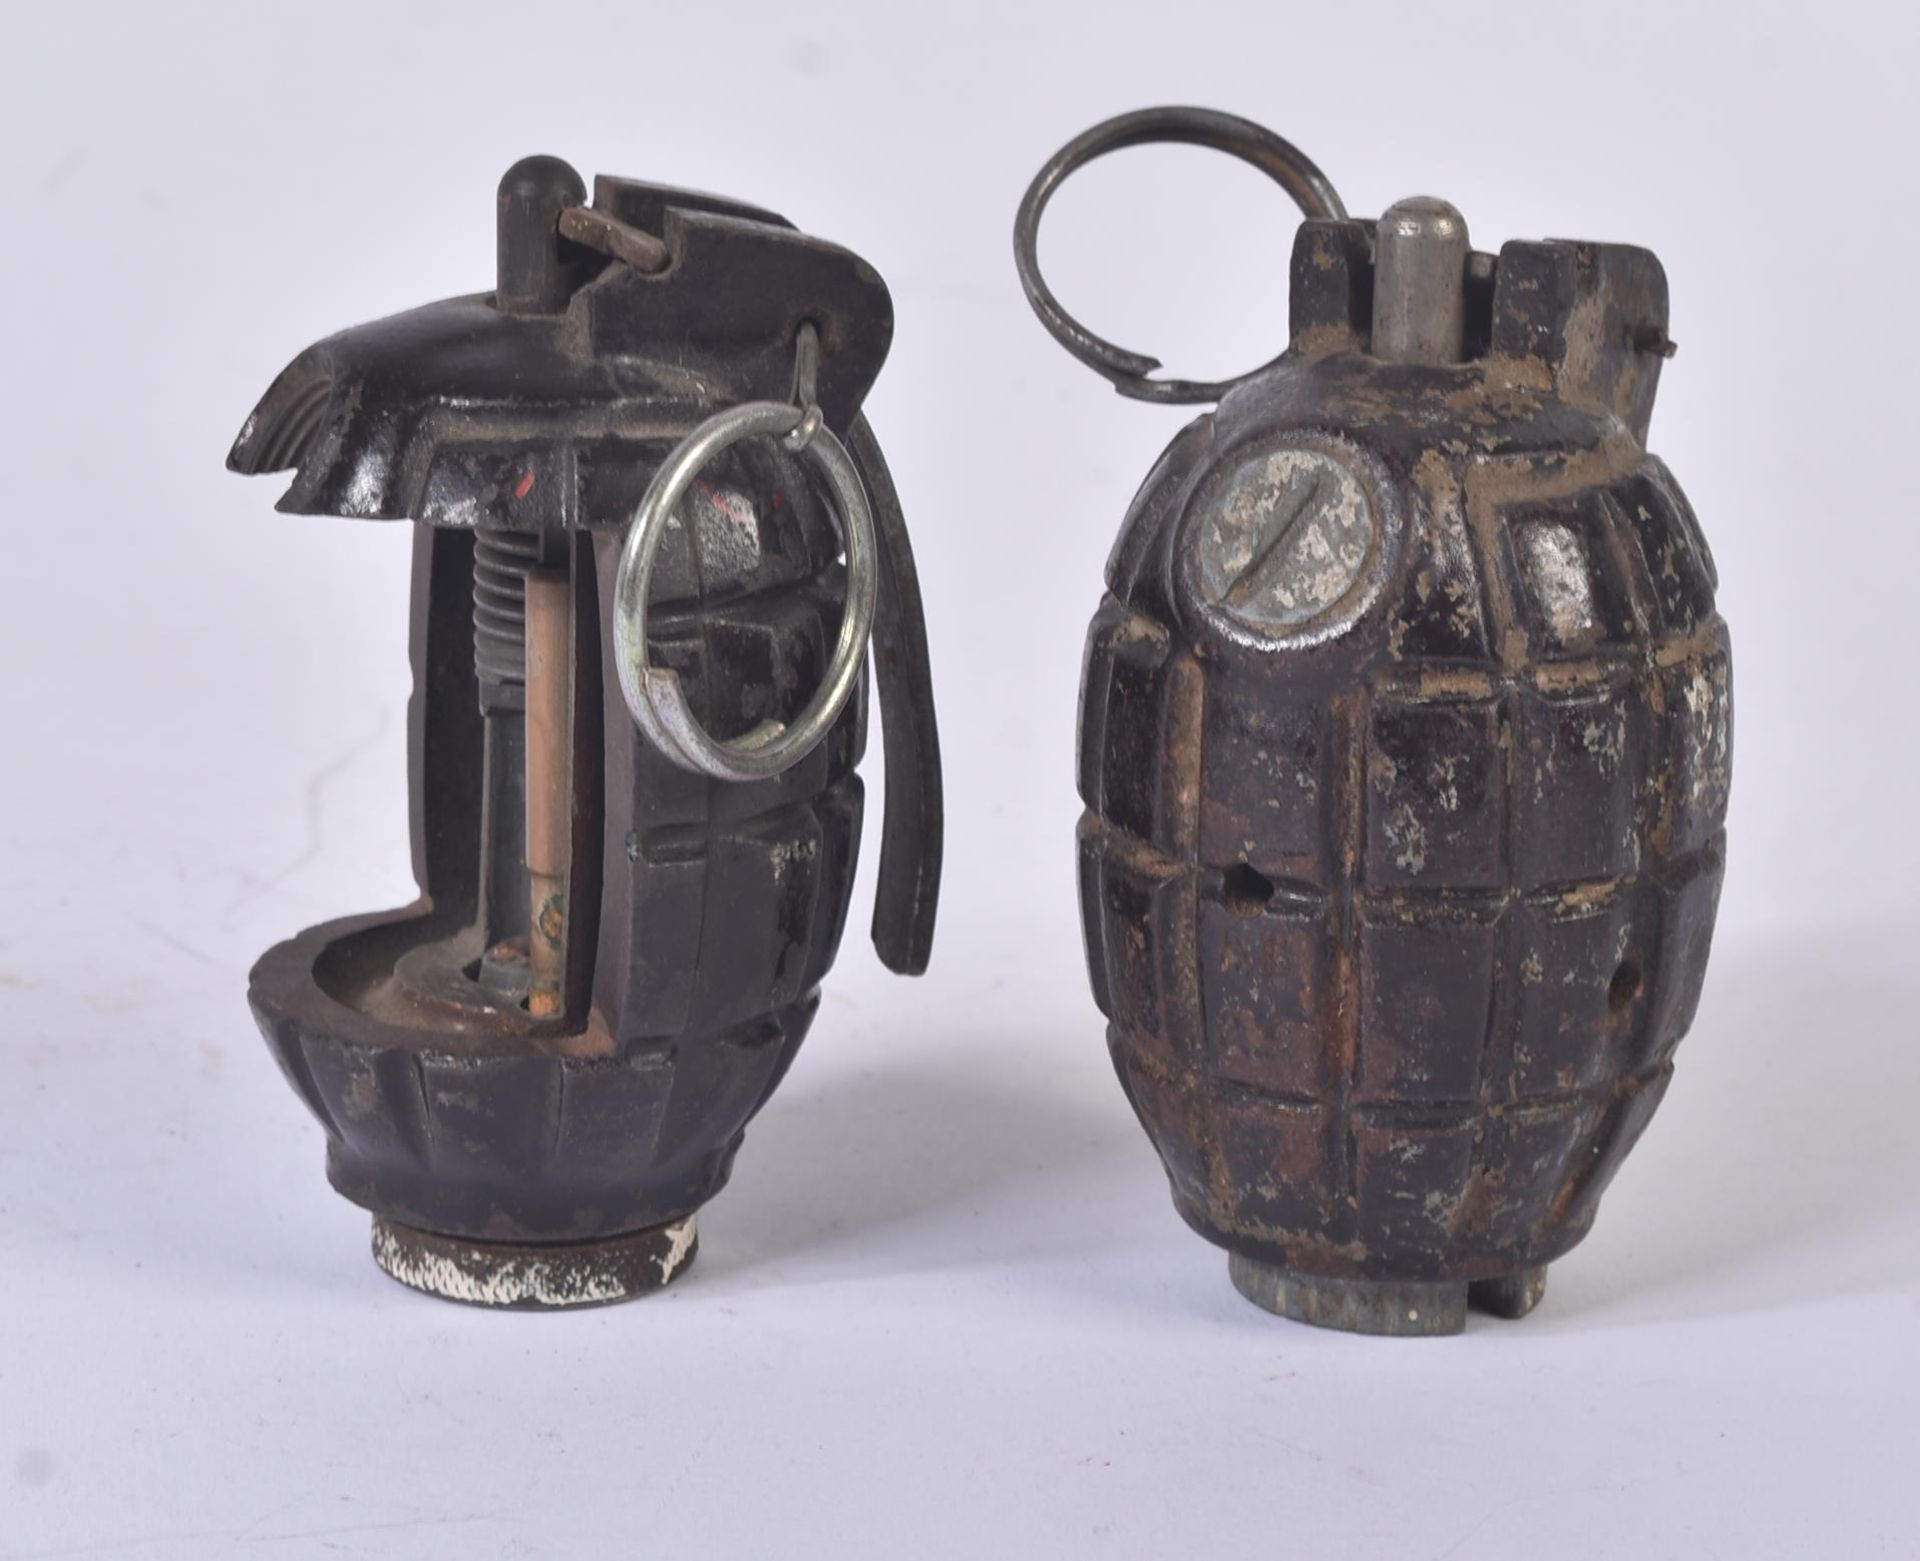 WWII SECOND WORLD WAR BRITISH ARMY MILLS BOMB HAND GRENADE - Image 4 of 6